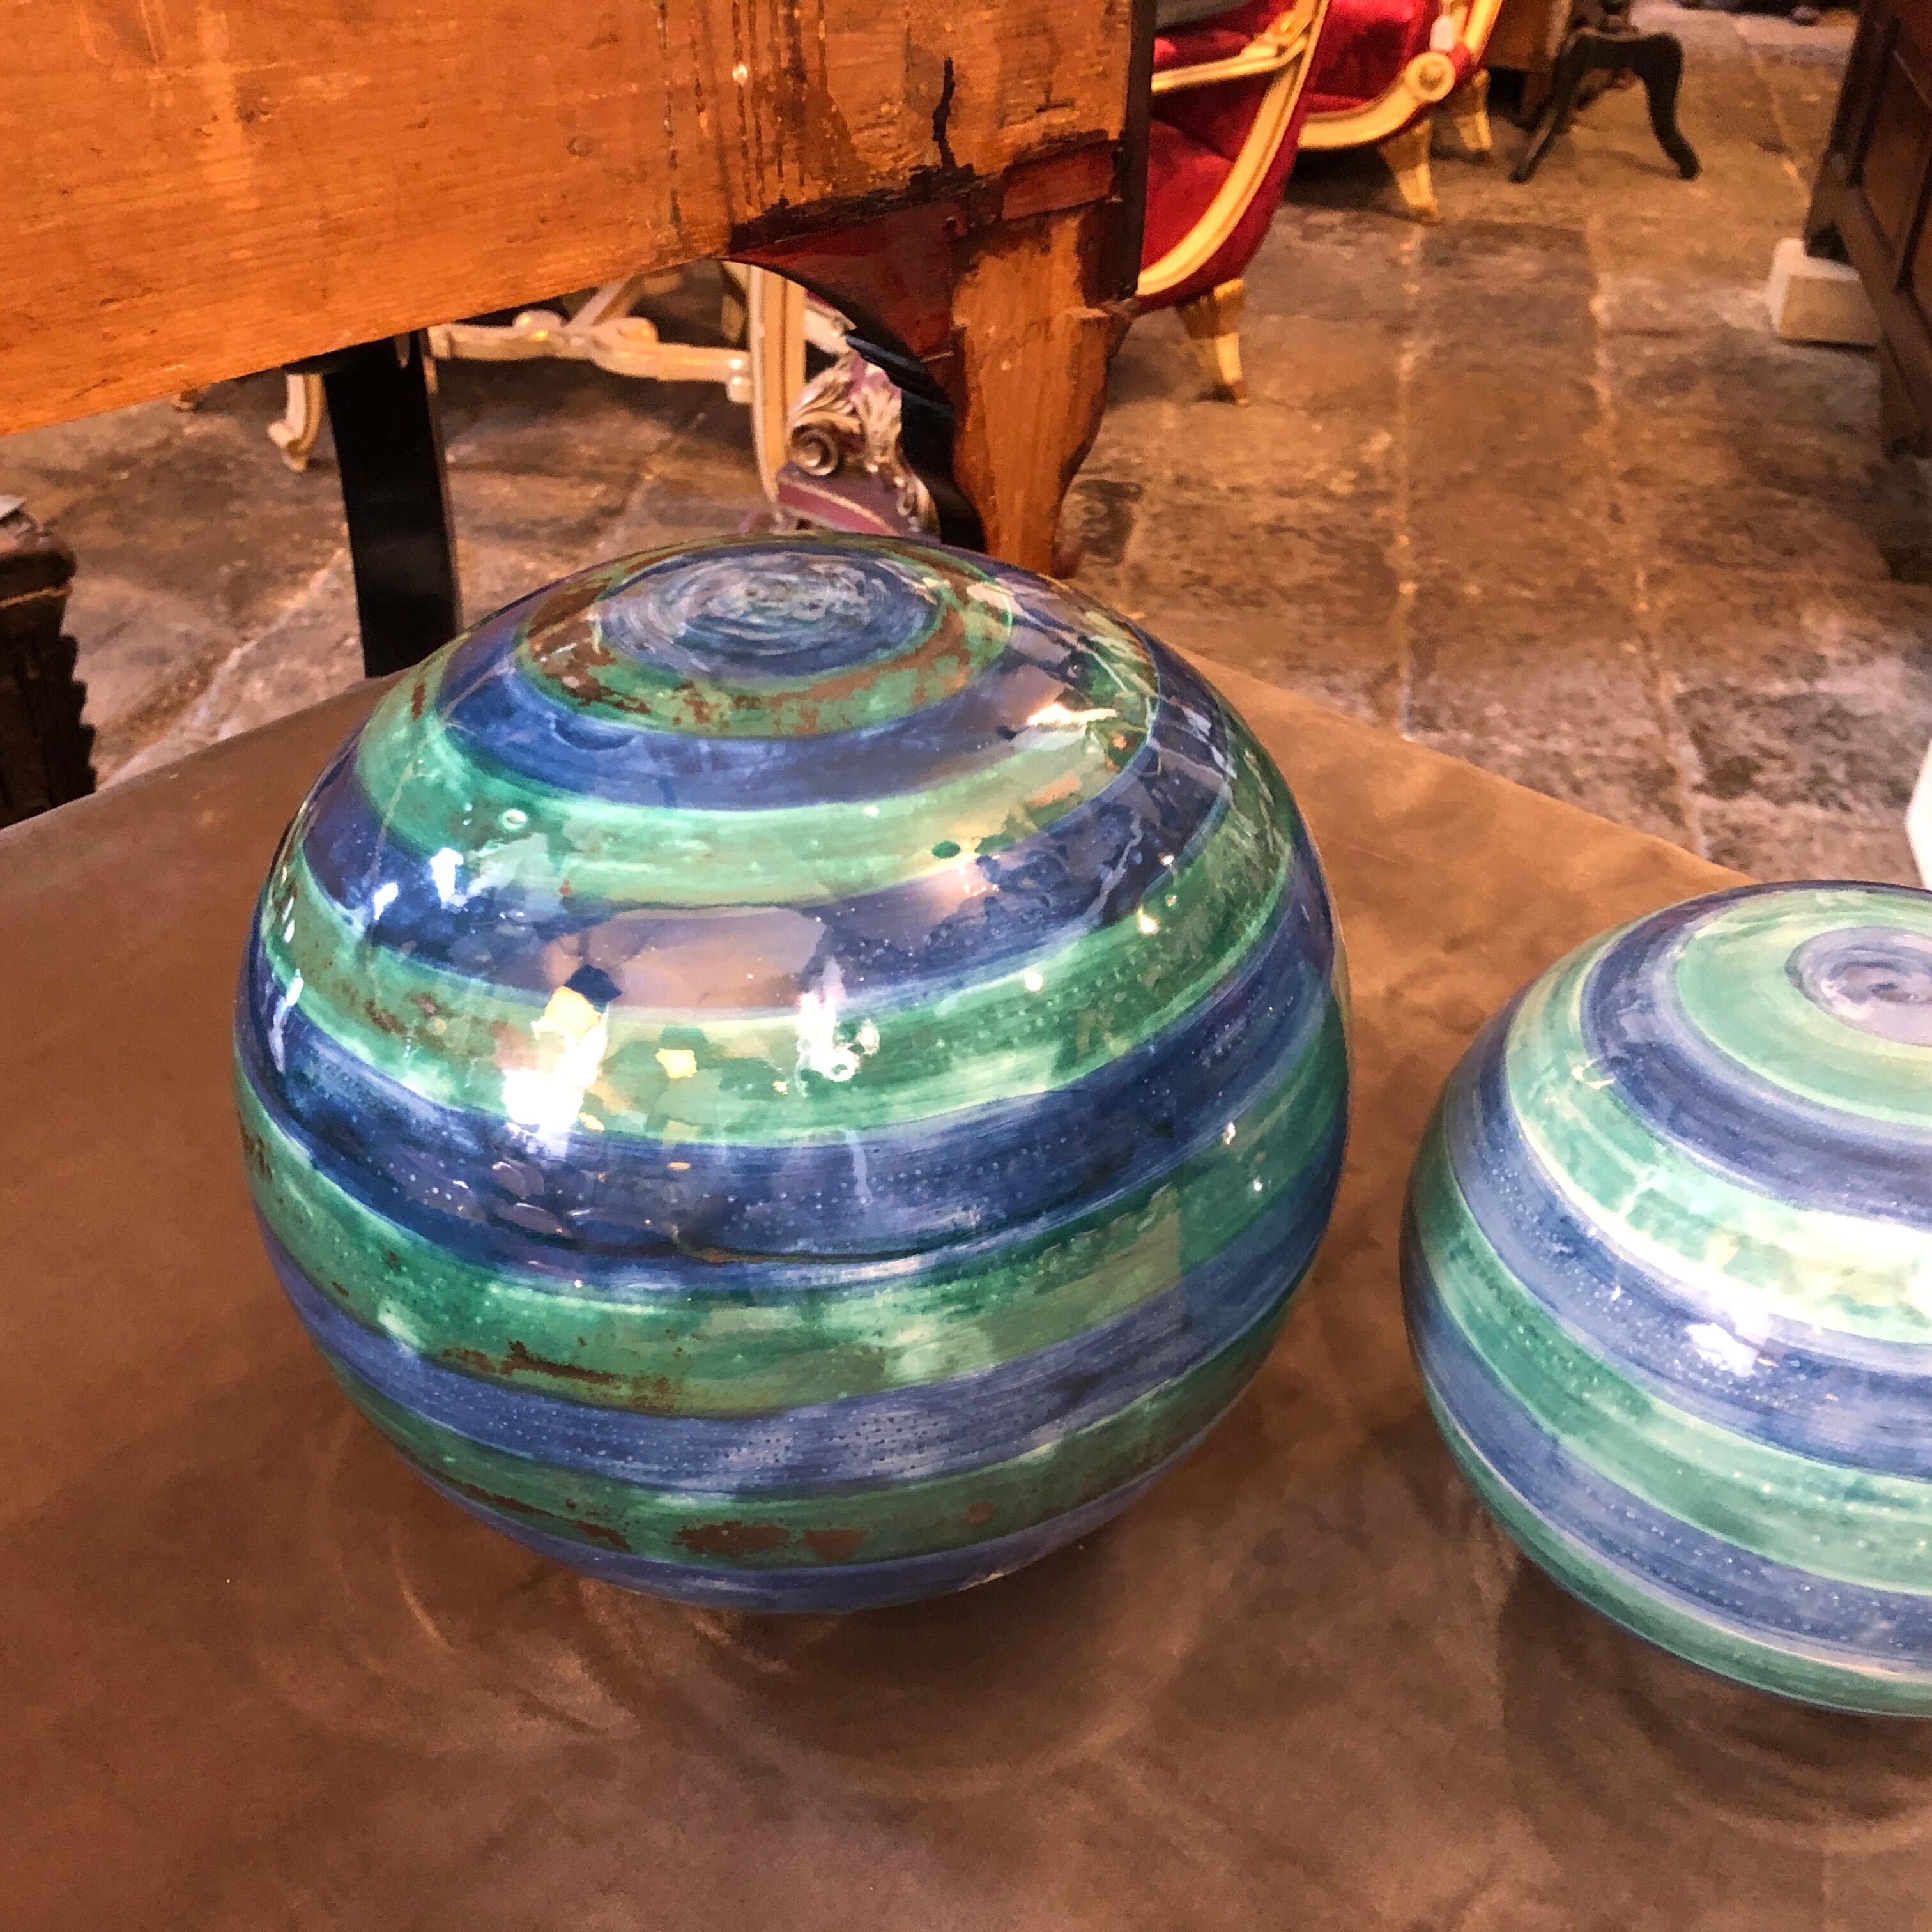 Three spheres made in Sicily, in the small town of Caltagirone, world famous for handcrafted ceramics. They are especially made for our store and are unique pieces. Measures: Diameter of the medium sphere is 14 cm, the small one is 9 cm diameter.